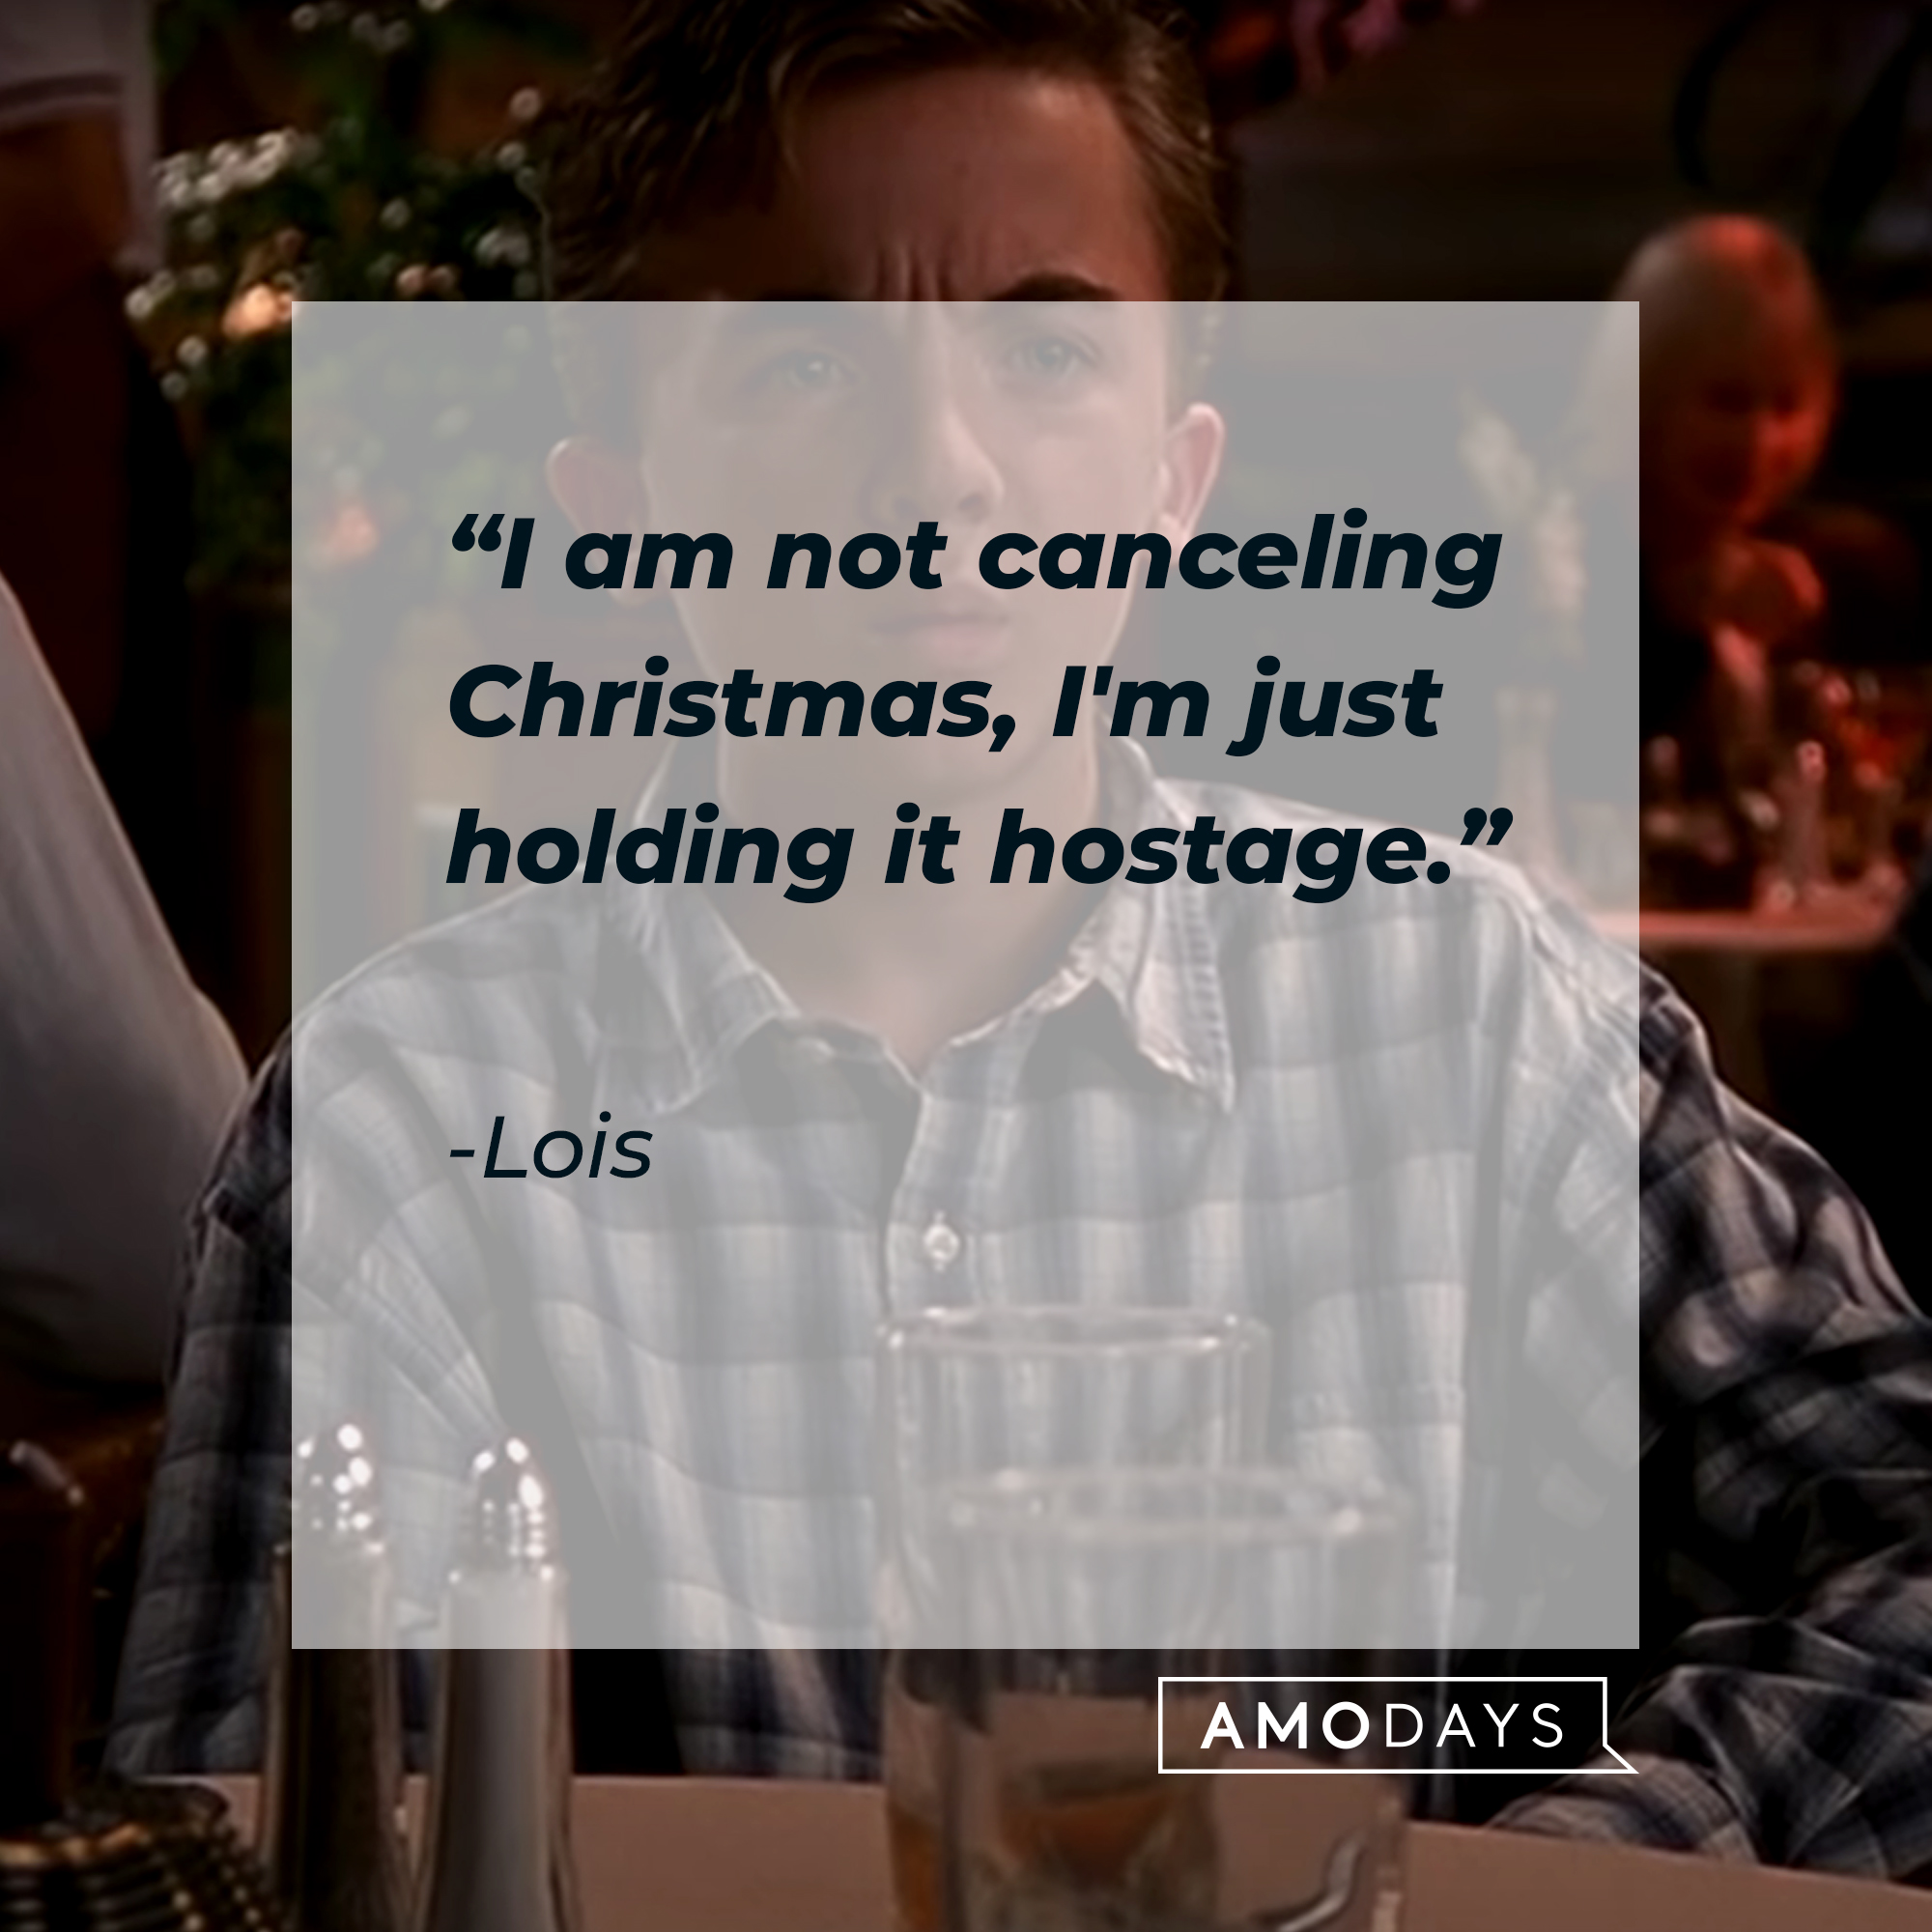 A "Malcolm in the Middle" character with Lois's quote: "I am not canceling Christmas, I'm just holding it hostage." | Source: YouTube.com/Channel4